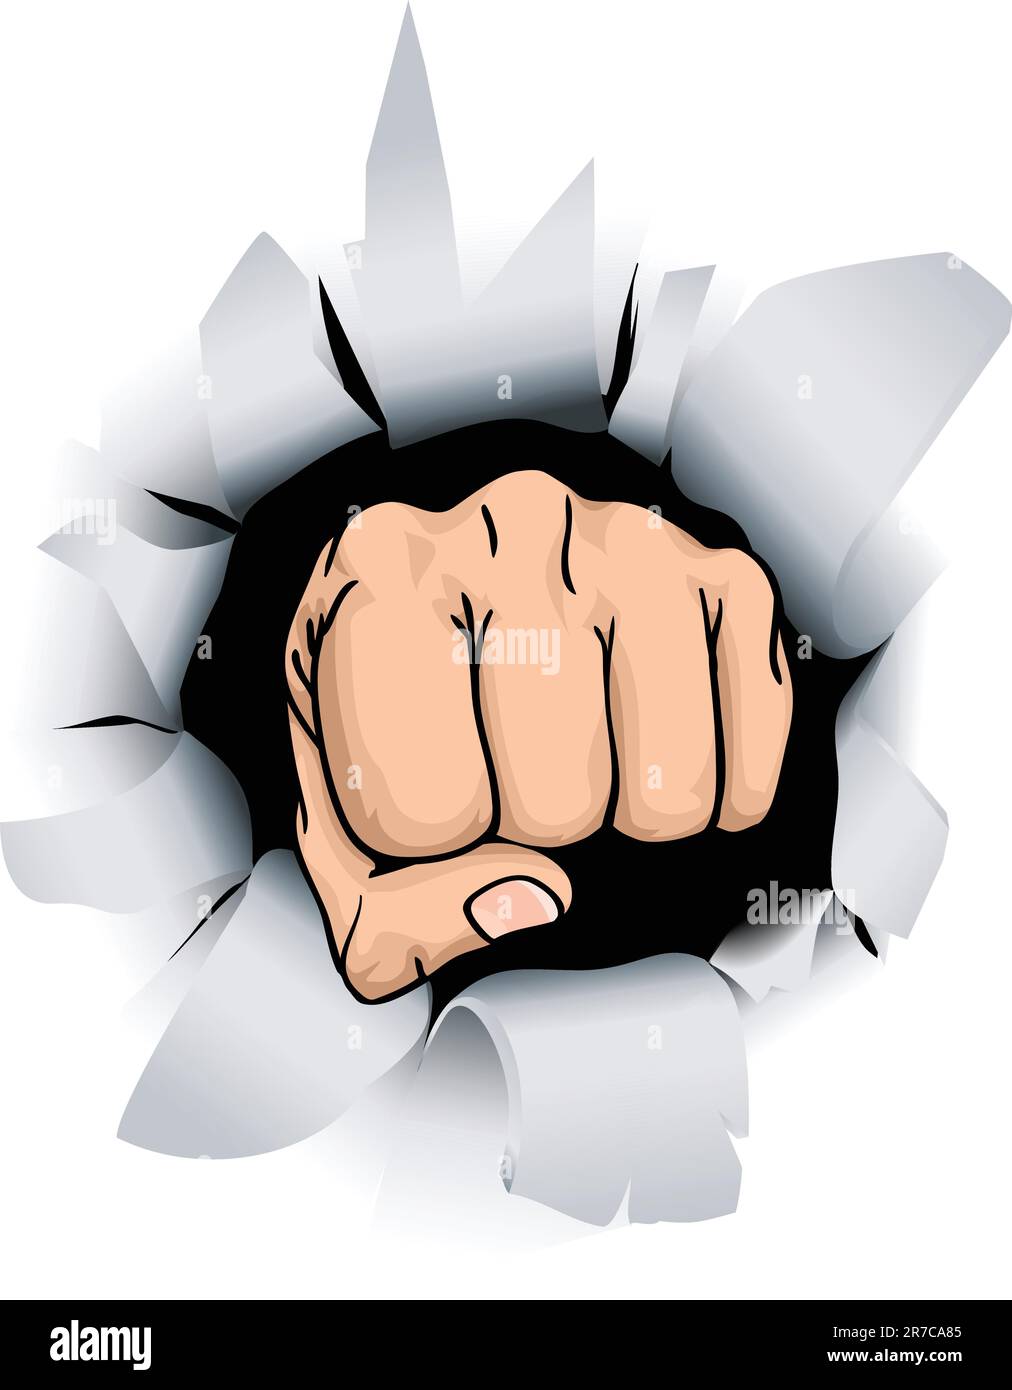 An illustration of a fist breaking through a wall, conceptual piece Stock Vector